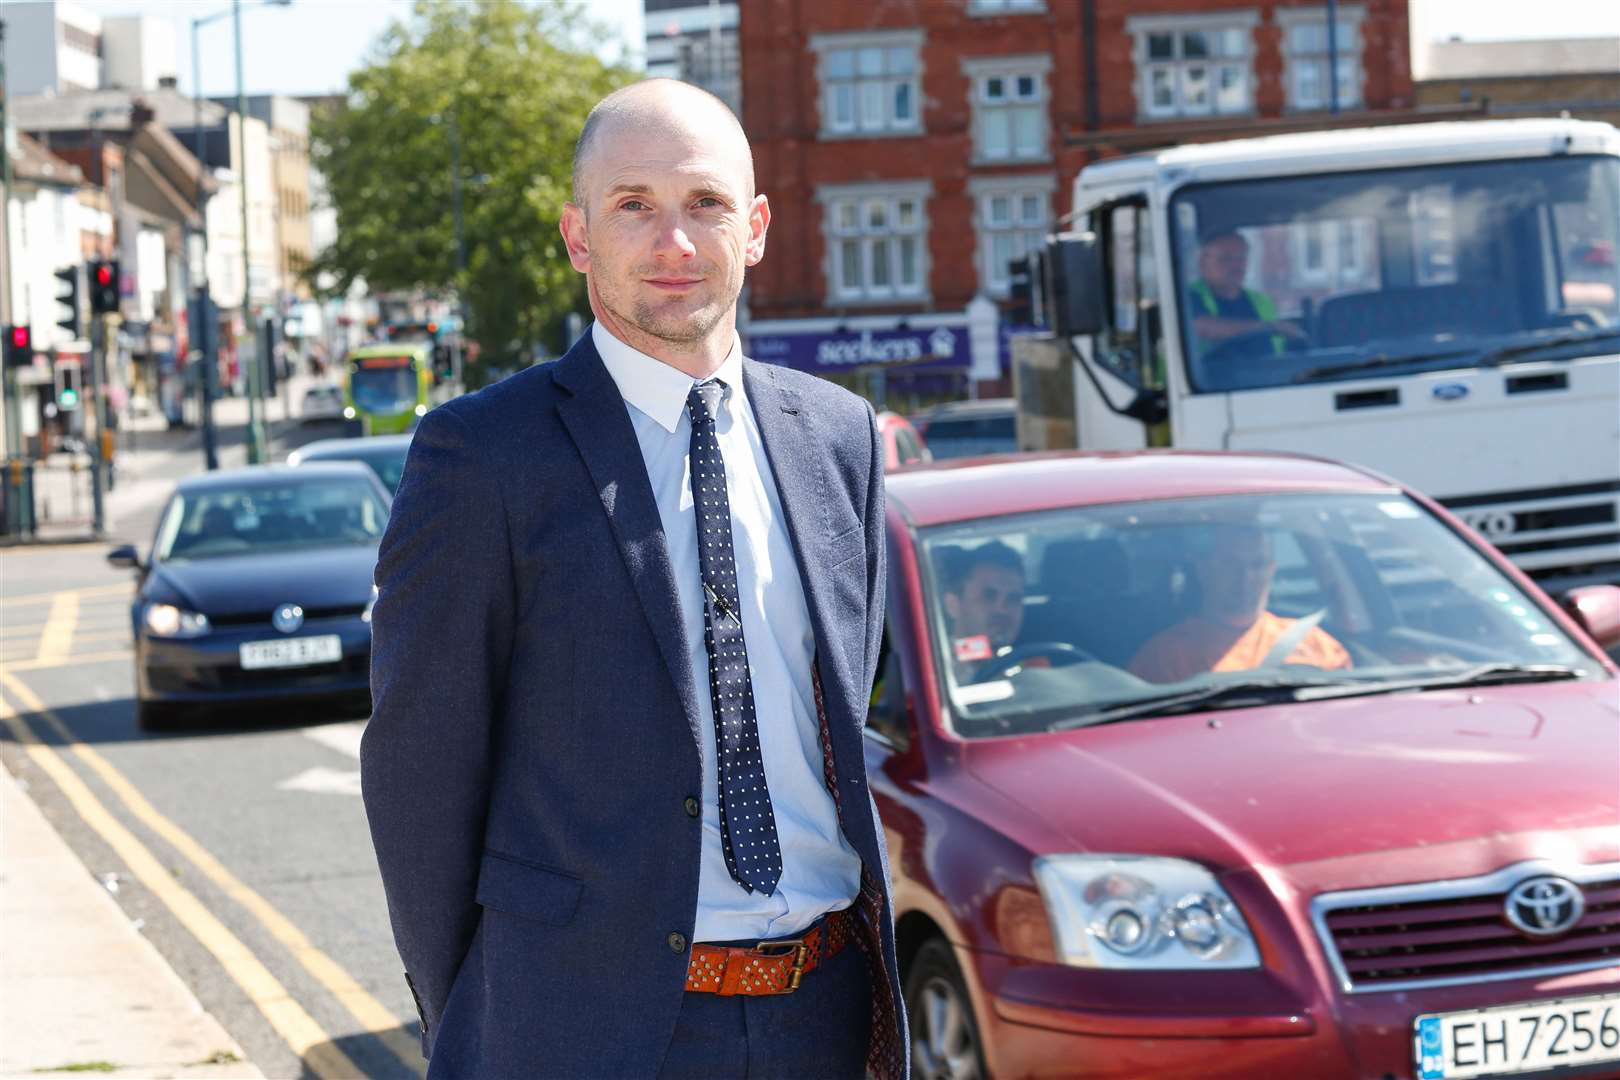 KCC project manager Russell Boorman is working on a 20mph scheme for Maidstone town centre